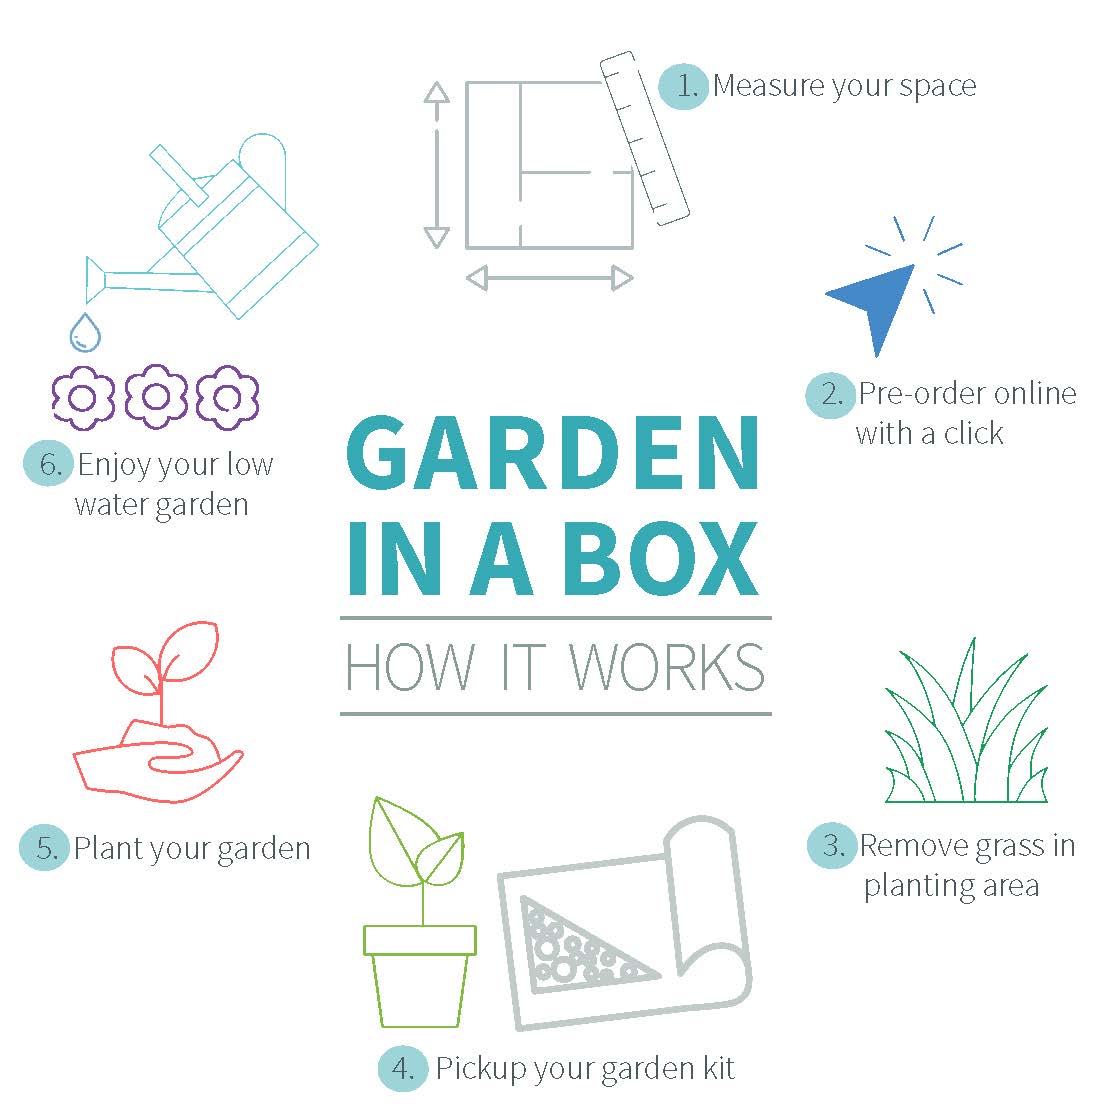 Order your garden today! Only a few discounts remain for Pinery Water customers. Shop here >> ResourceCentral.org/Gardens
#GardenInABox #coloradogardening #waterwiselandscaping #droughttolerantplants